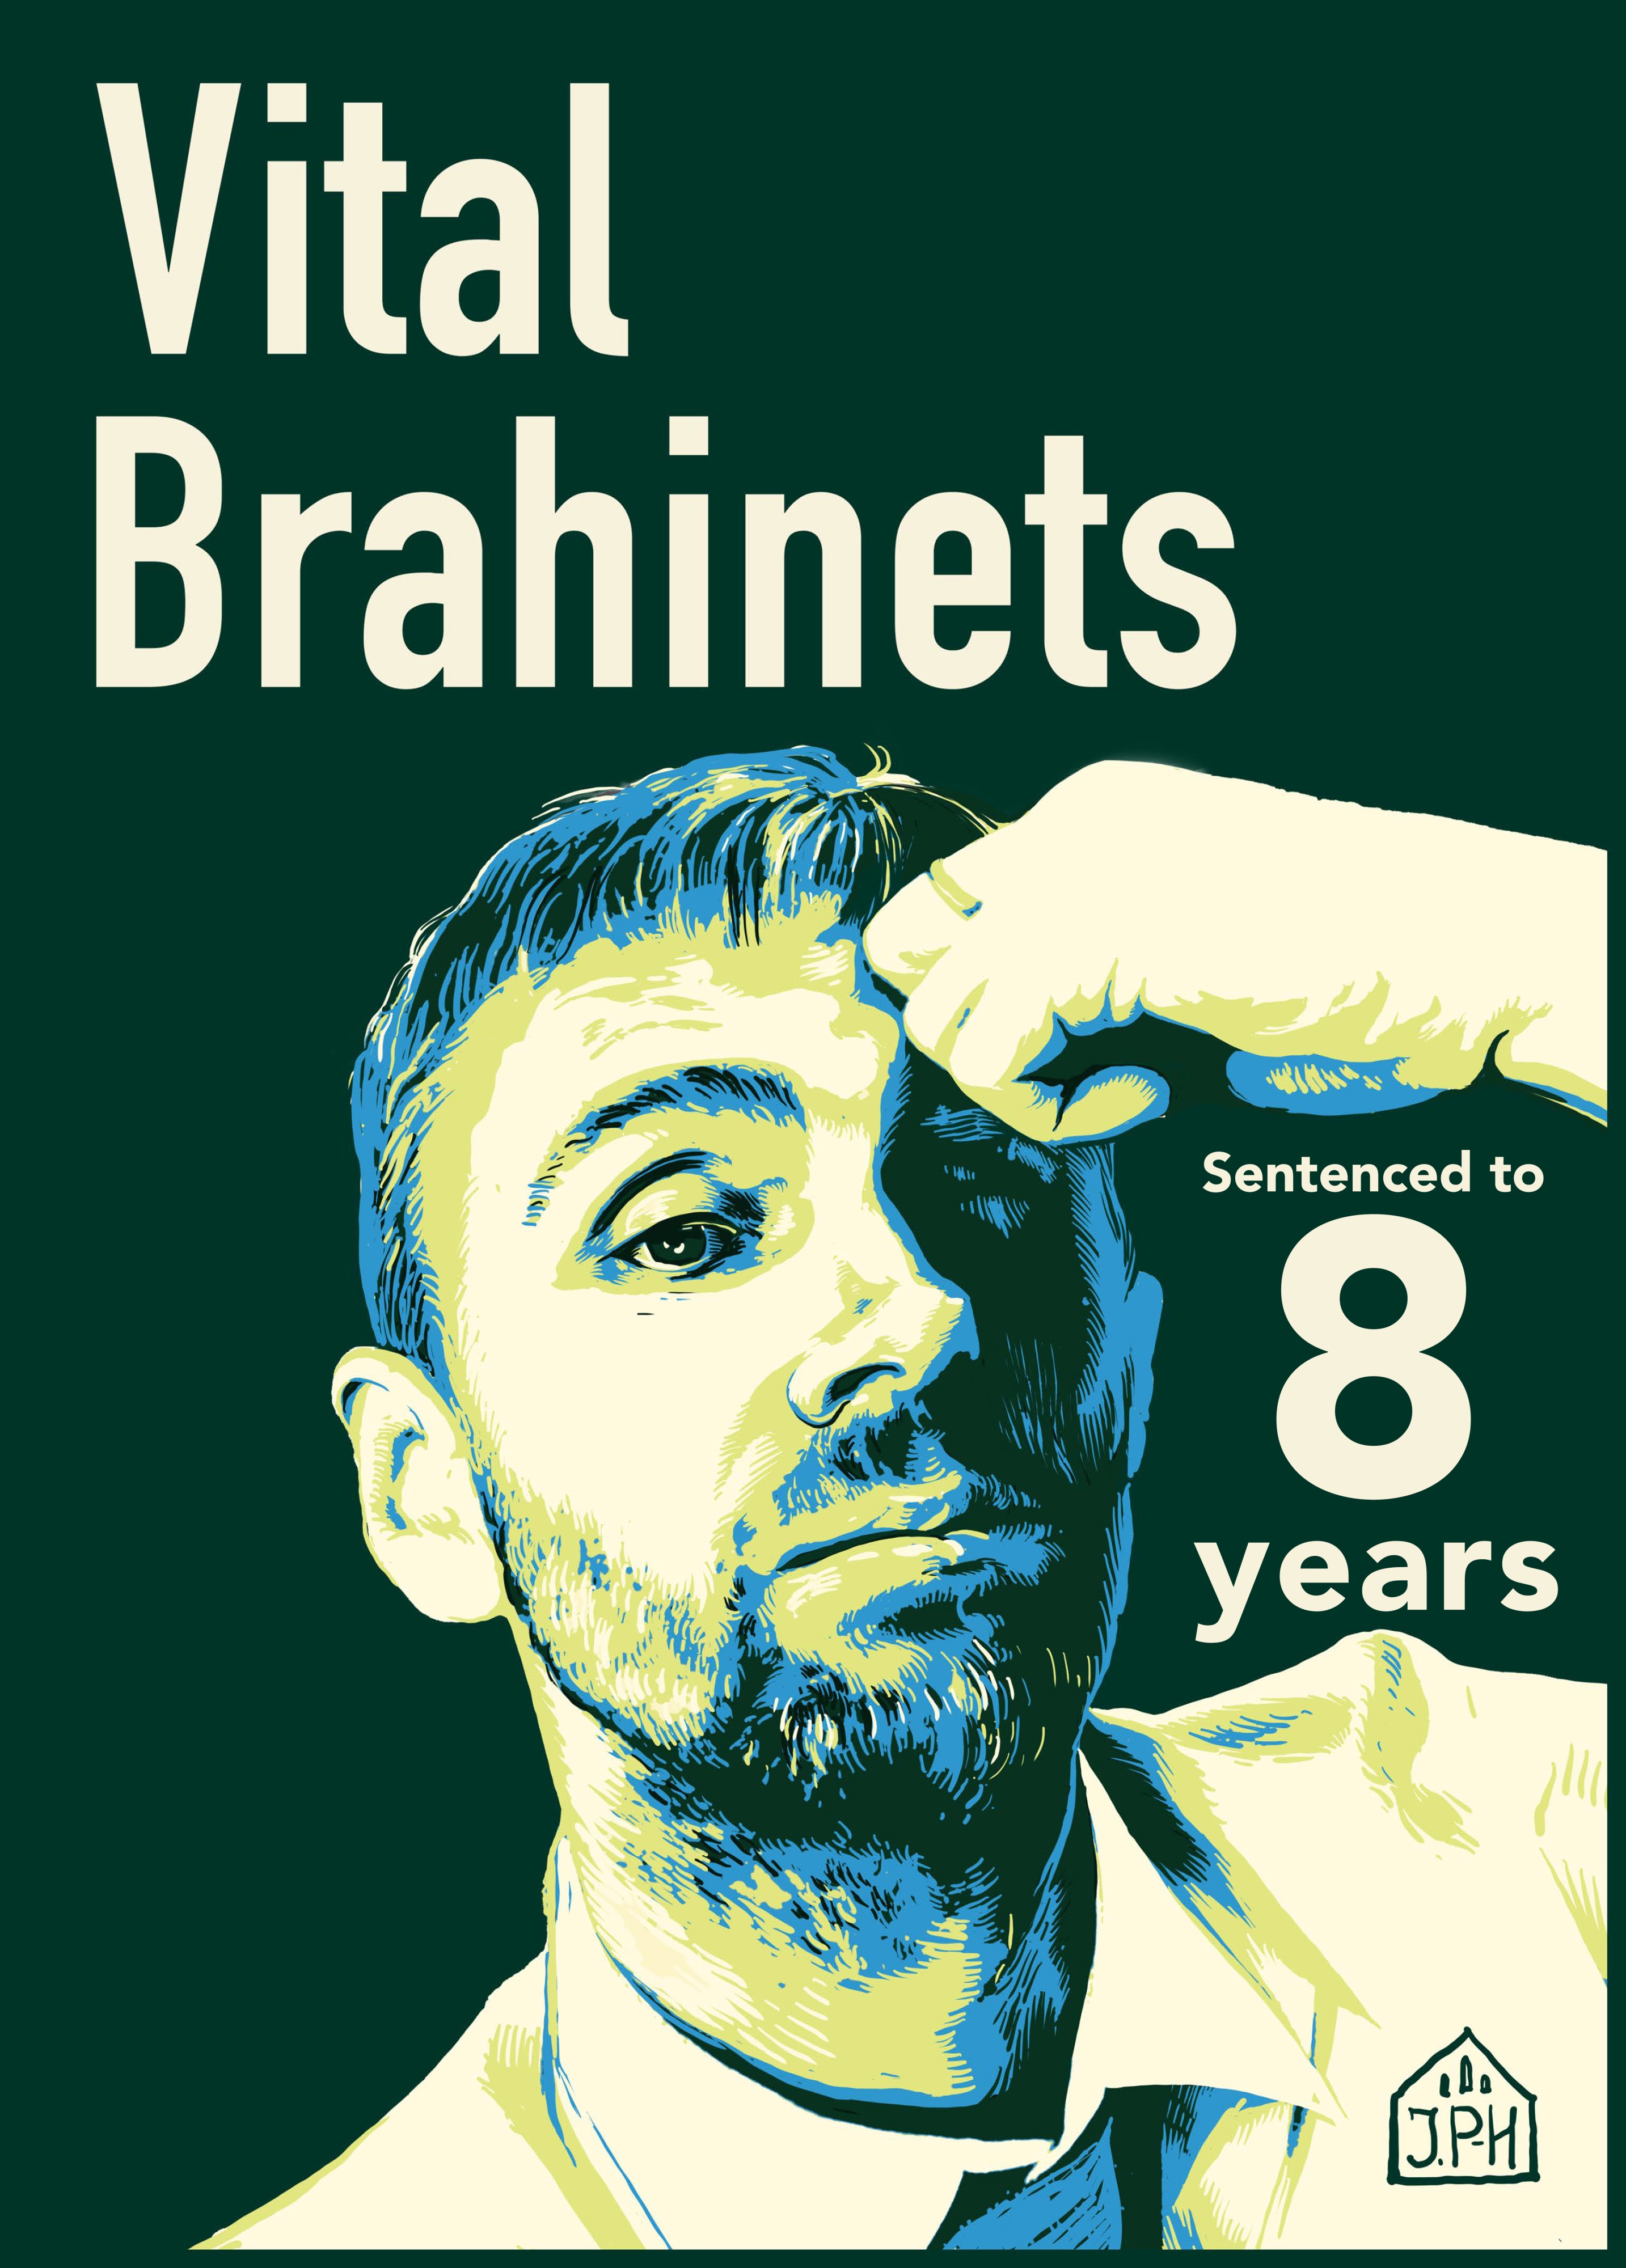 Illustrated poster with a headshot of Vital Brahinets